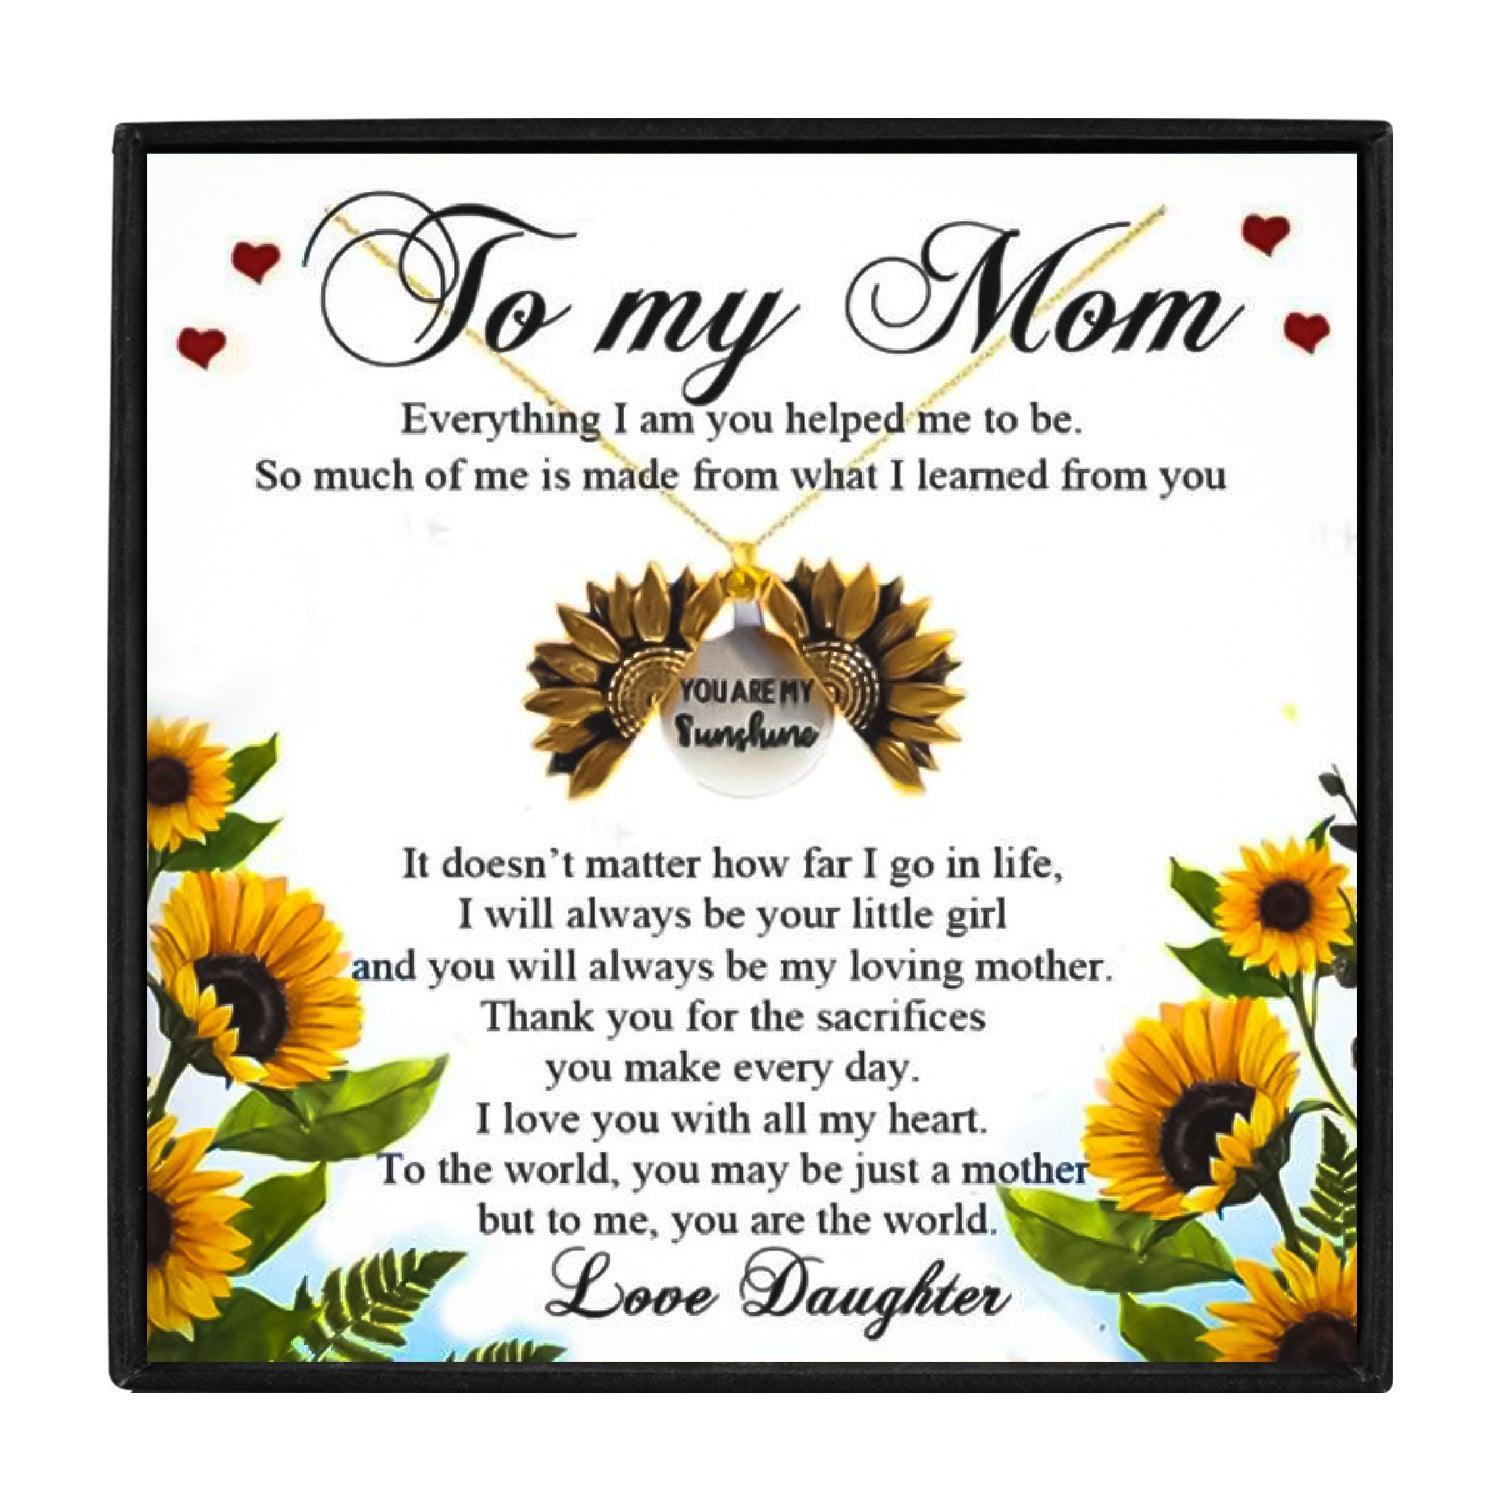 Sunflower Necklaces To My Mom From Daughter for Christmas 2023 | Sunflower Necklaces To My Mom From Daughter - undefined | gift for mom, Gifts for Bonus Mom, mom birthday gift, mom gift, mom gift ideas, Simple Sunflower Pendant Necklace, sunflower, Sunflower Necklace | From Hunny Life | hunnylife.com